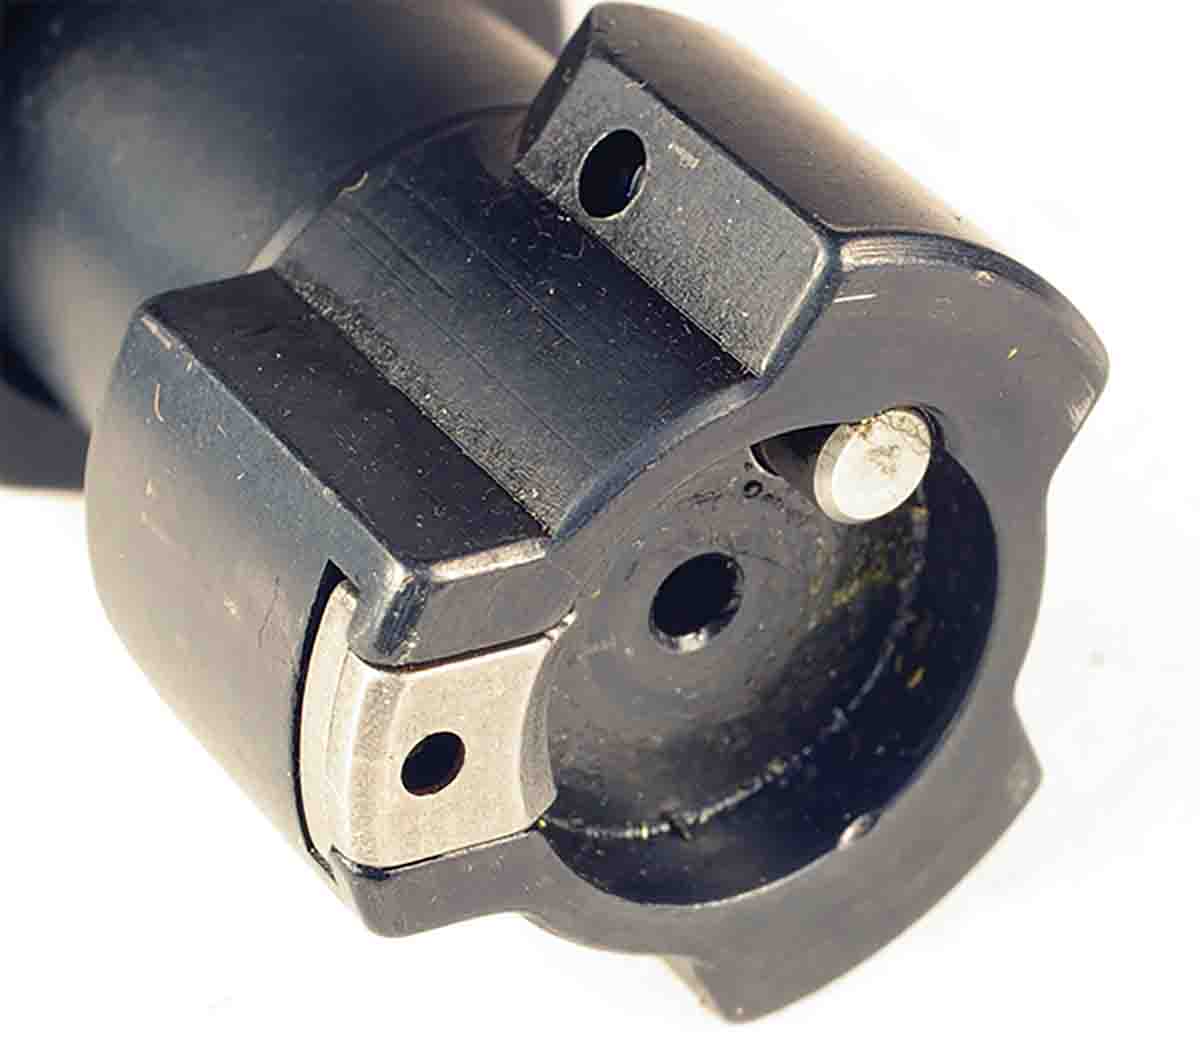 The three-lug bolt has a sliding tab extractor on the face of one of the lugs.